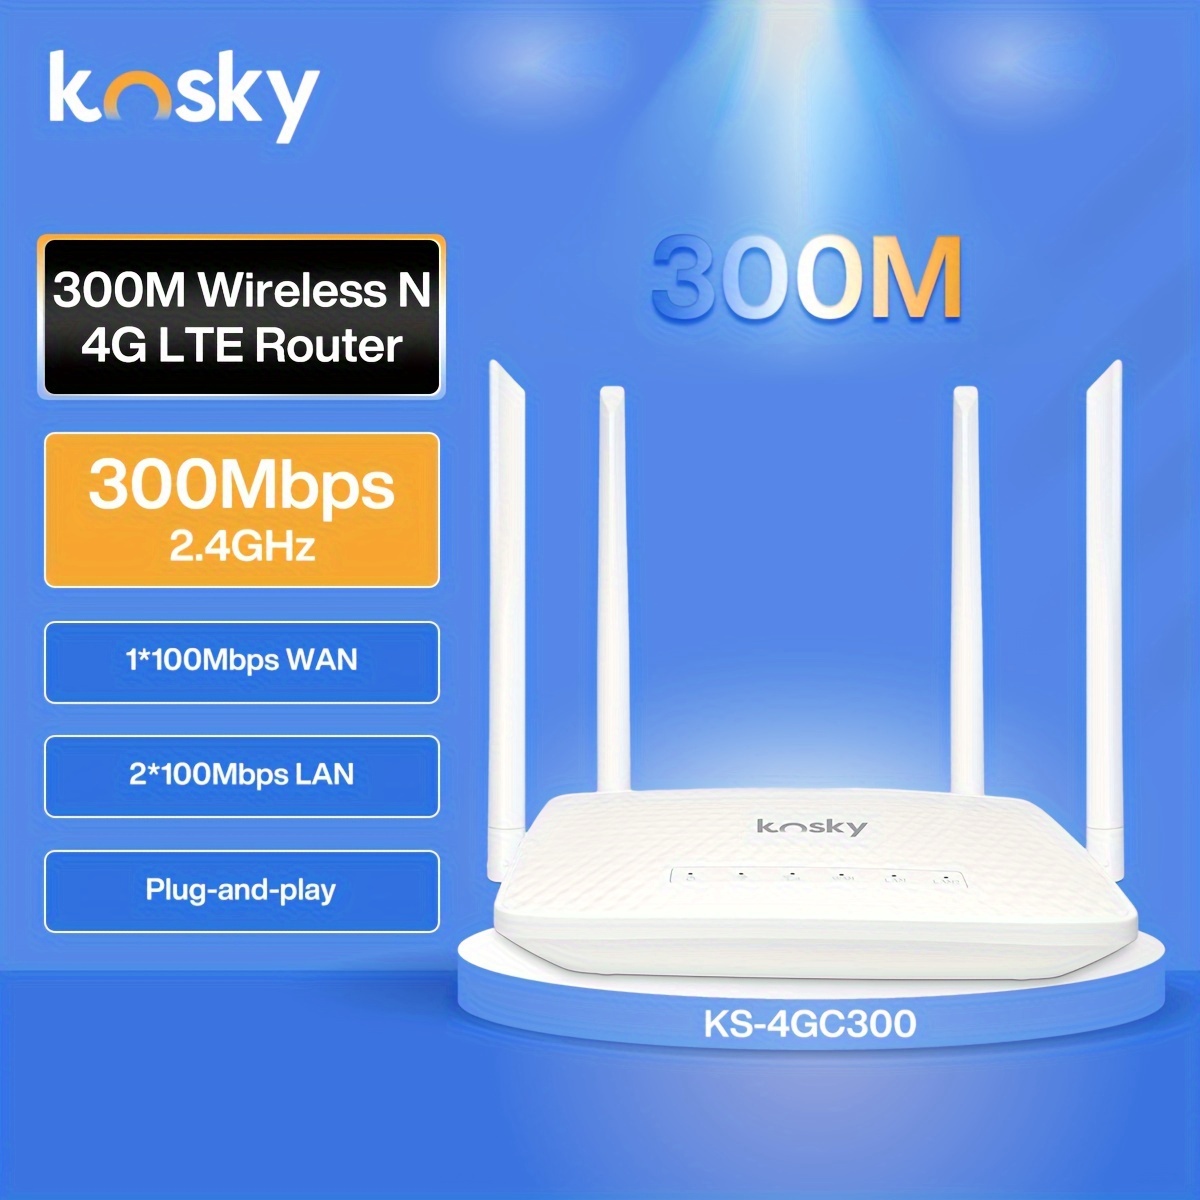 5G CPE Router with SIM Card Slot, Dual Band WiFi 6 & AX3000 Router